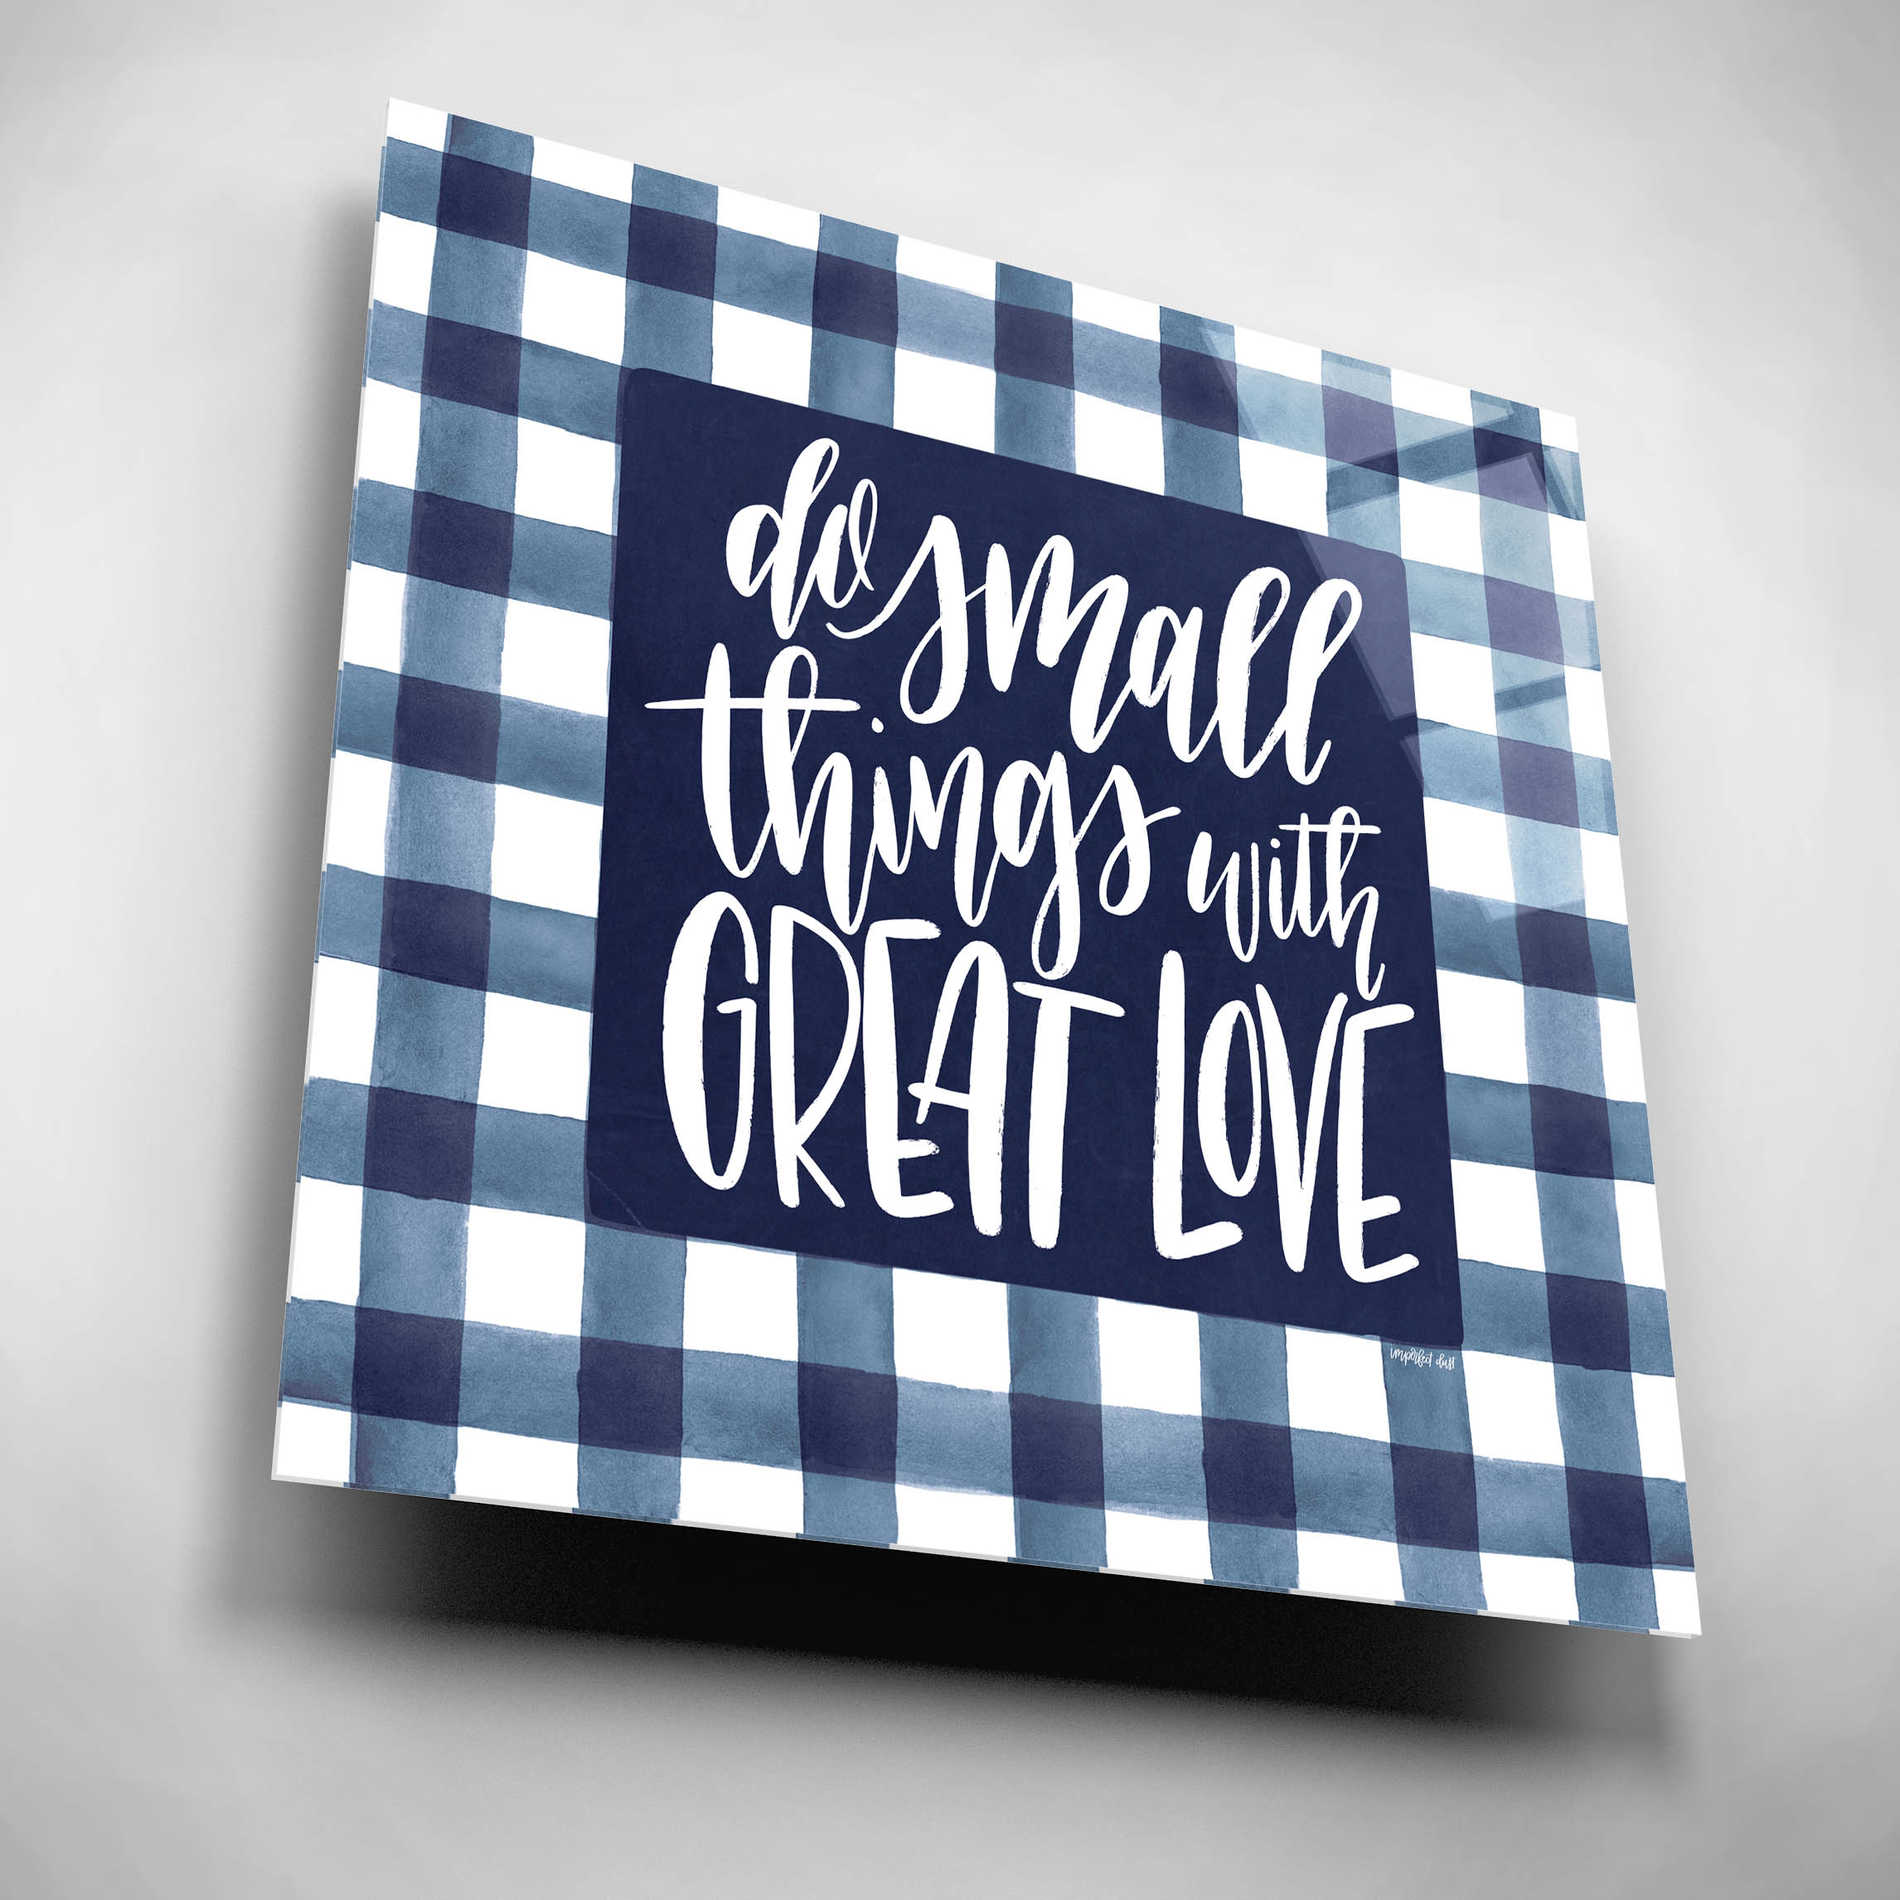 Epic Art 'Do Small Things with Great Love' by Imperfect Dust, Acrylic Glass Wall Art,12x12